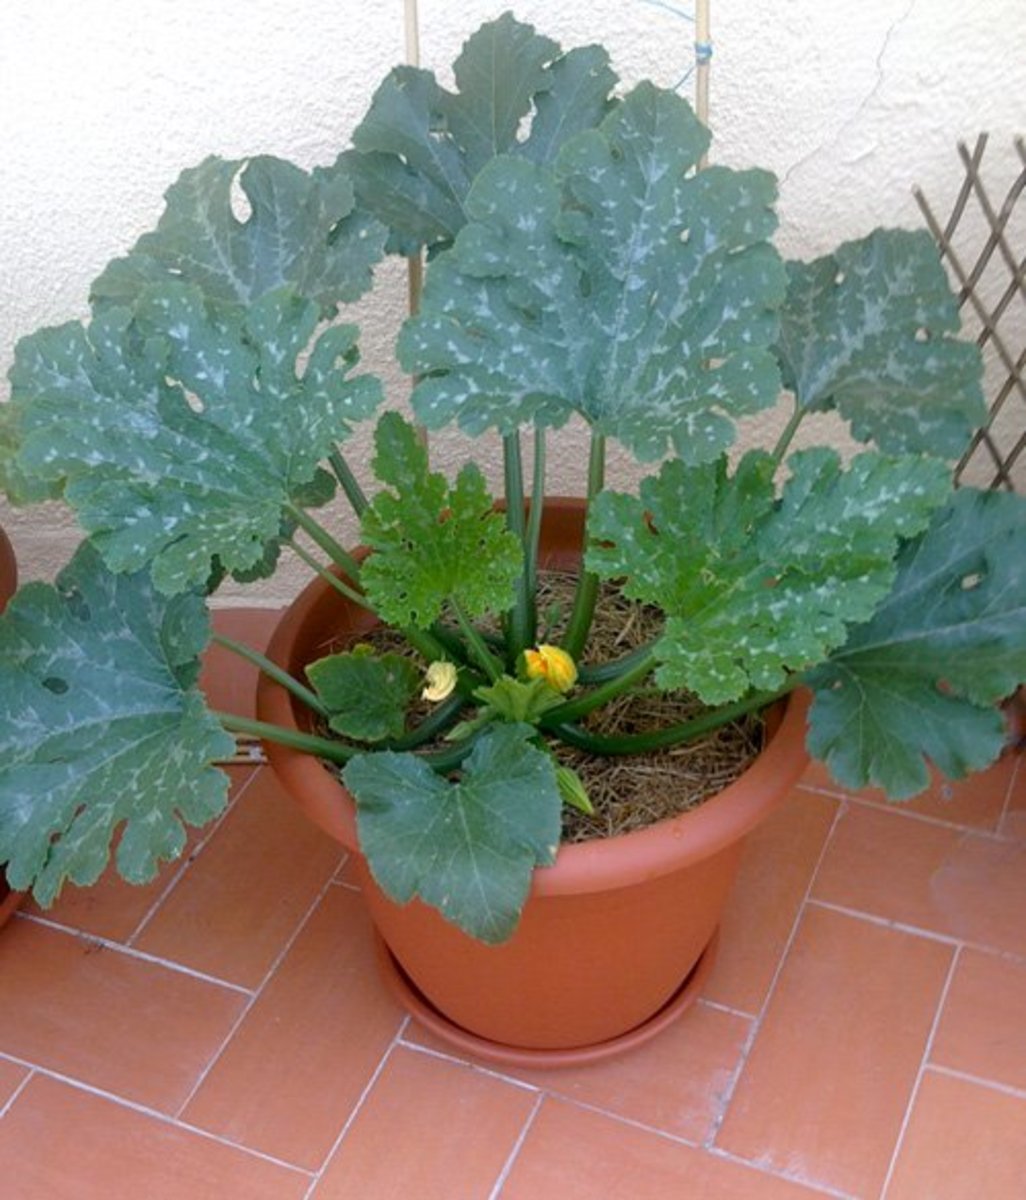 Organic Container Gardening: Growing Zucchini (Courgettes) in Pots